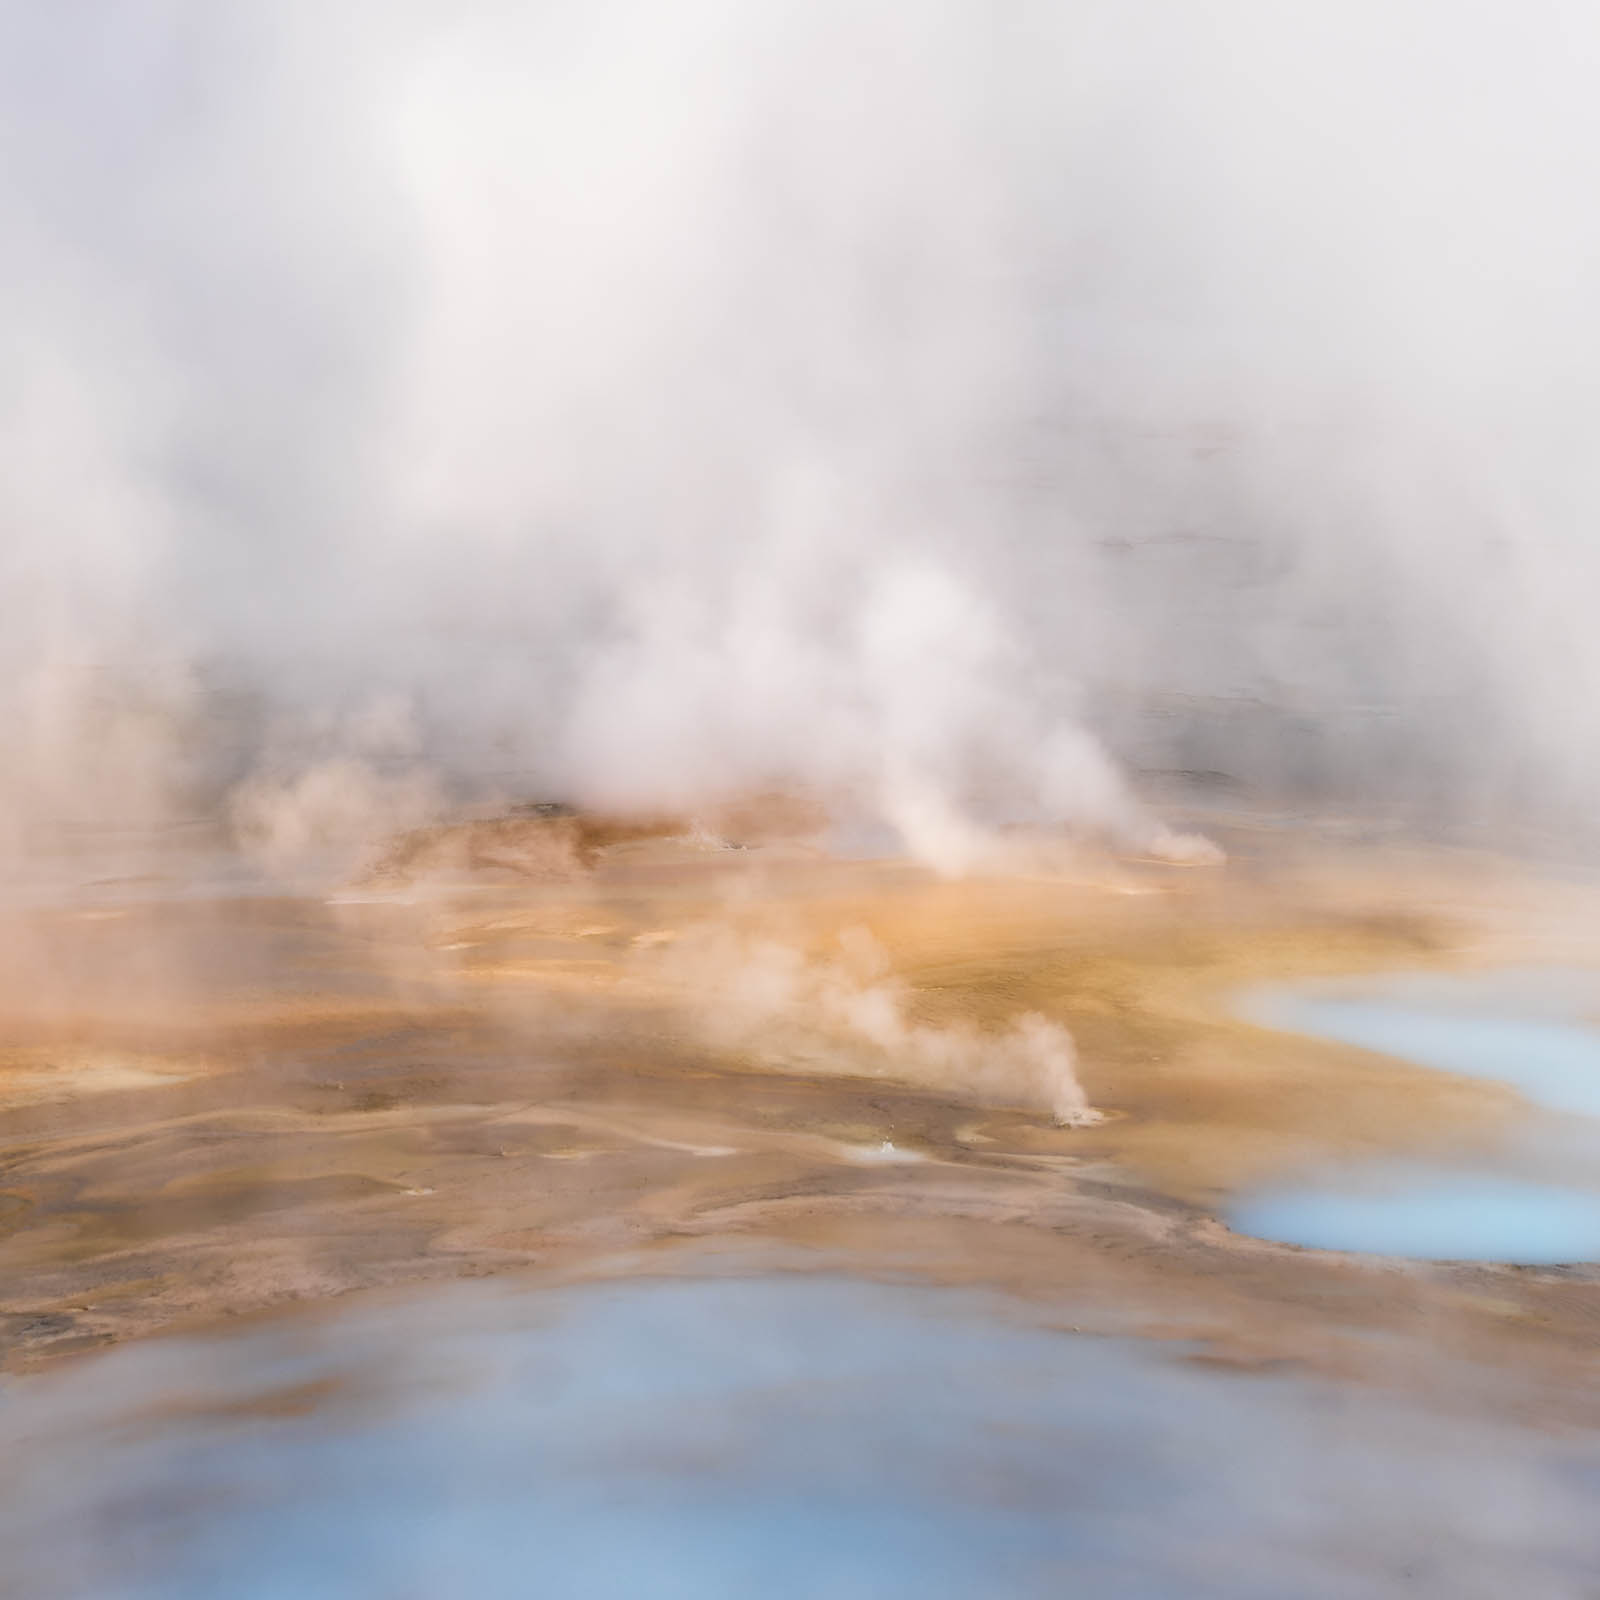 Steaming thermal feature in Porcelain Basin at Yellowstone National Park